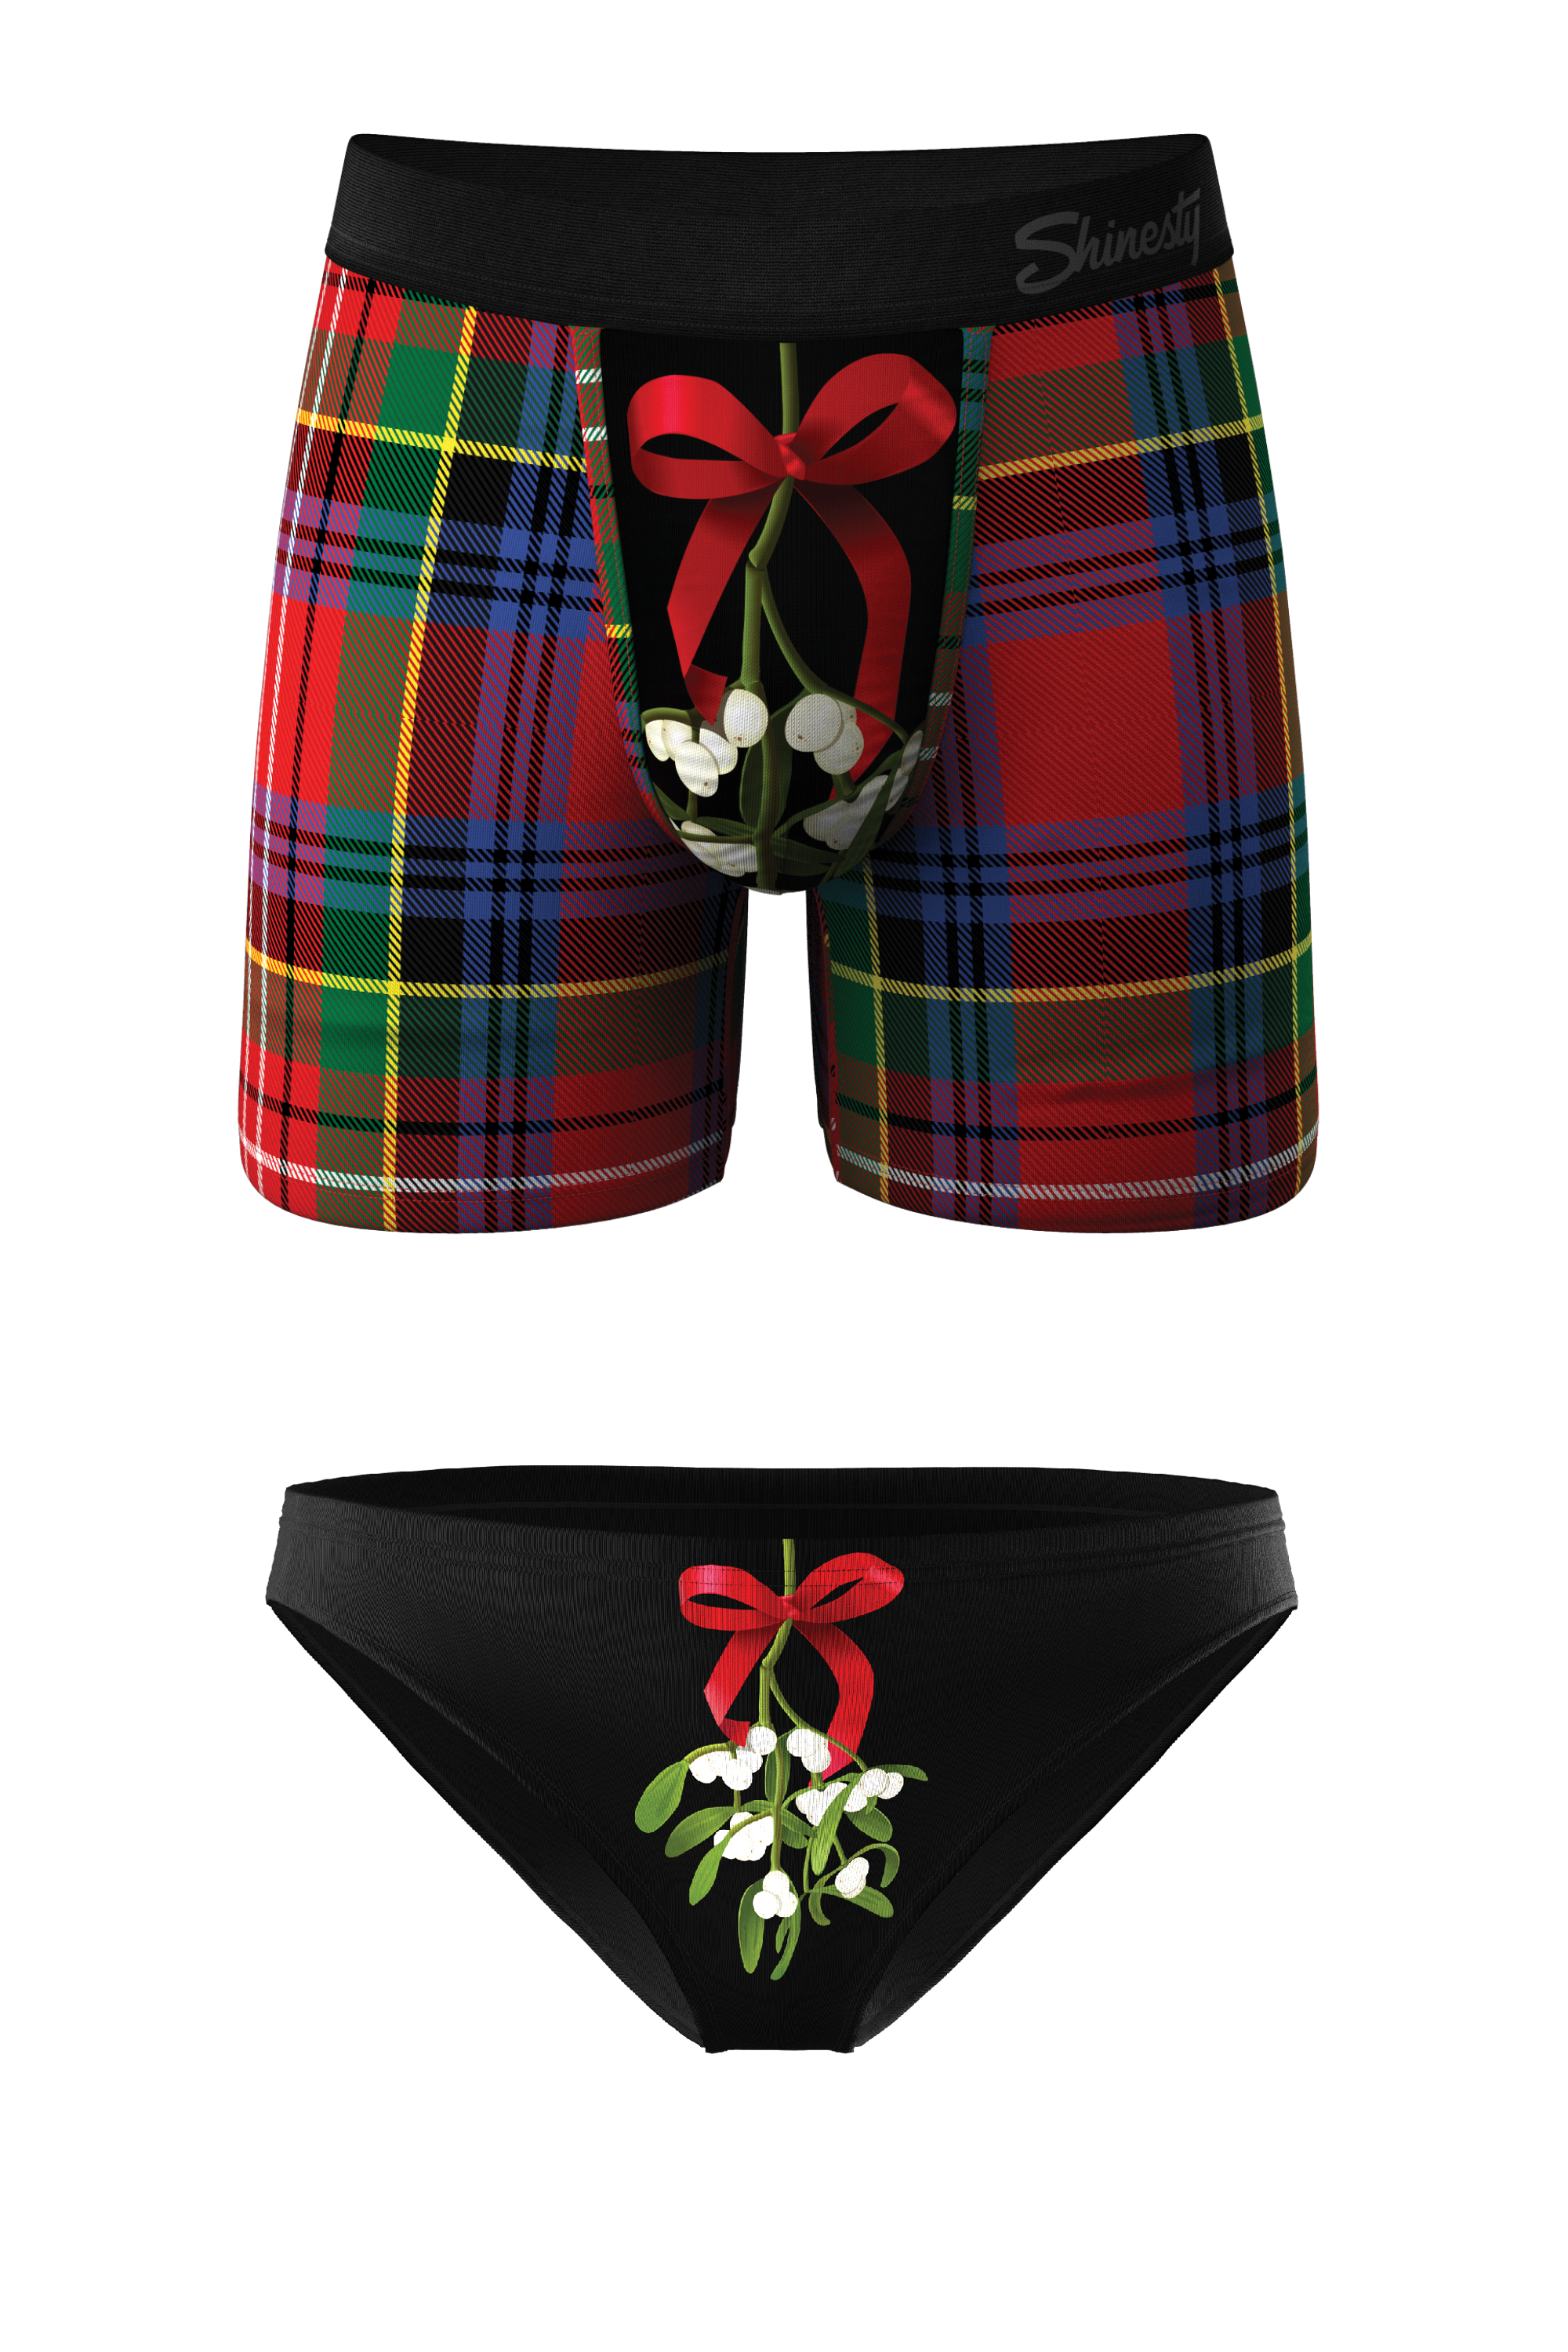 The Kiss Me There | Mistletoe Ball Hammock Boxer® And Bikini Matching  Couples Underwear Pack